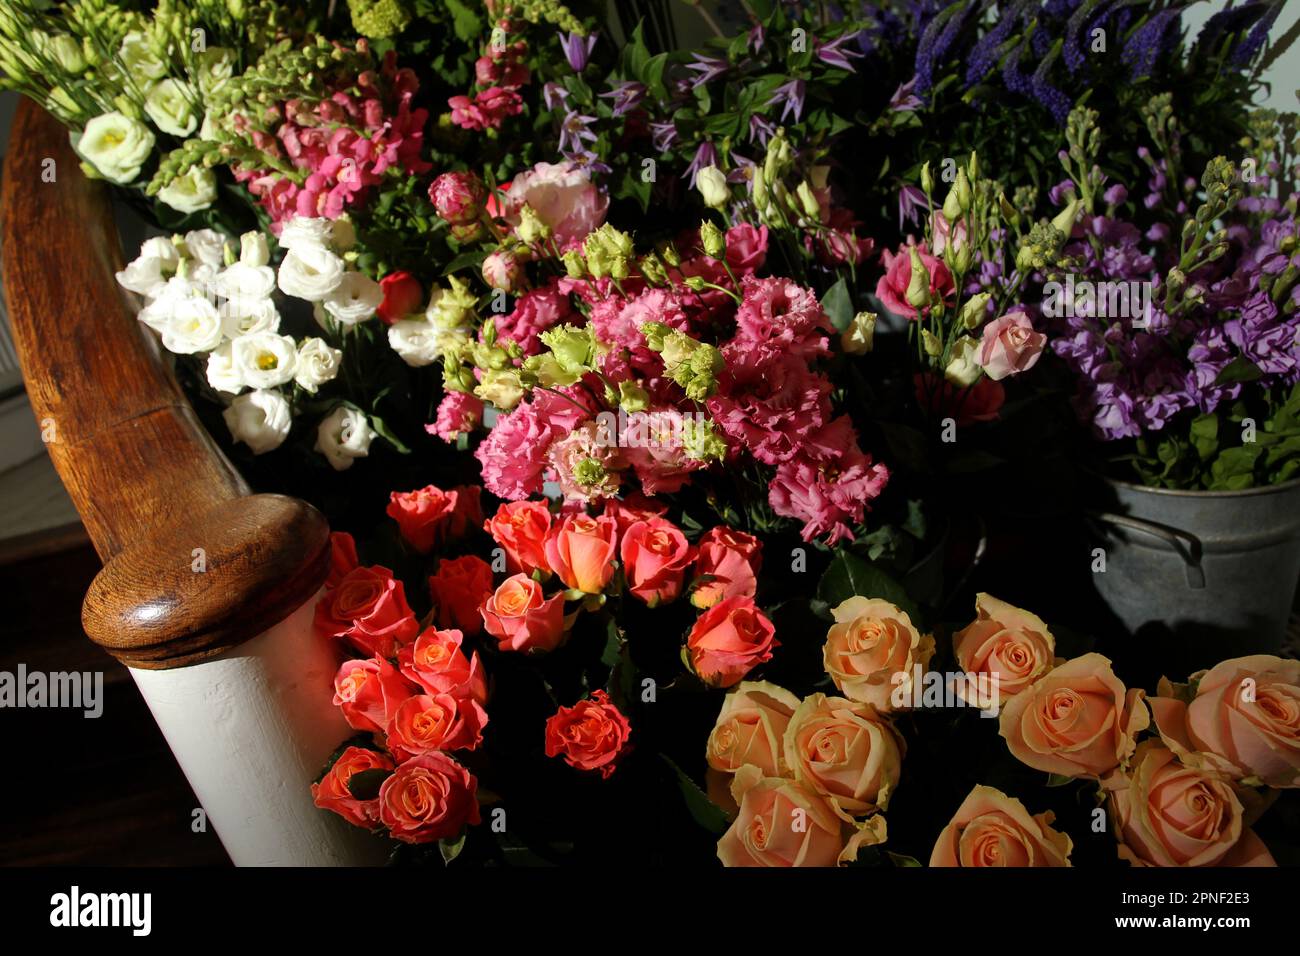 Flowers, plants and bouquets for sale at a Florists shop and floristry Workshop in Chichester, West Sussex, UK. Stock Photo